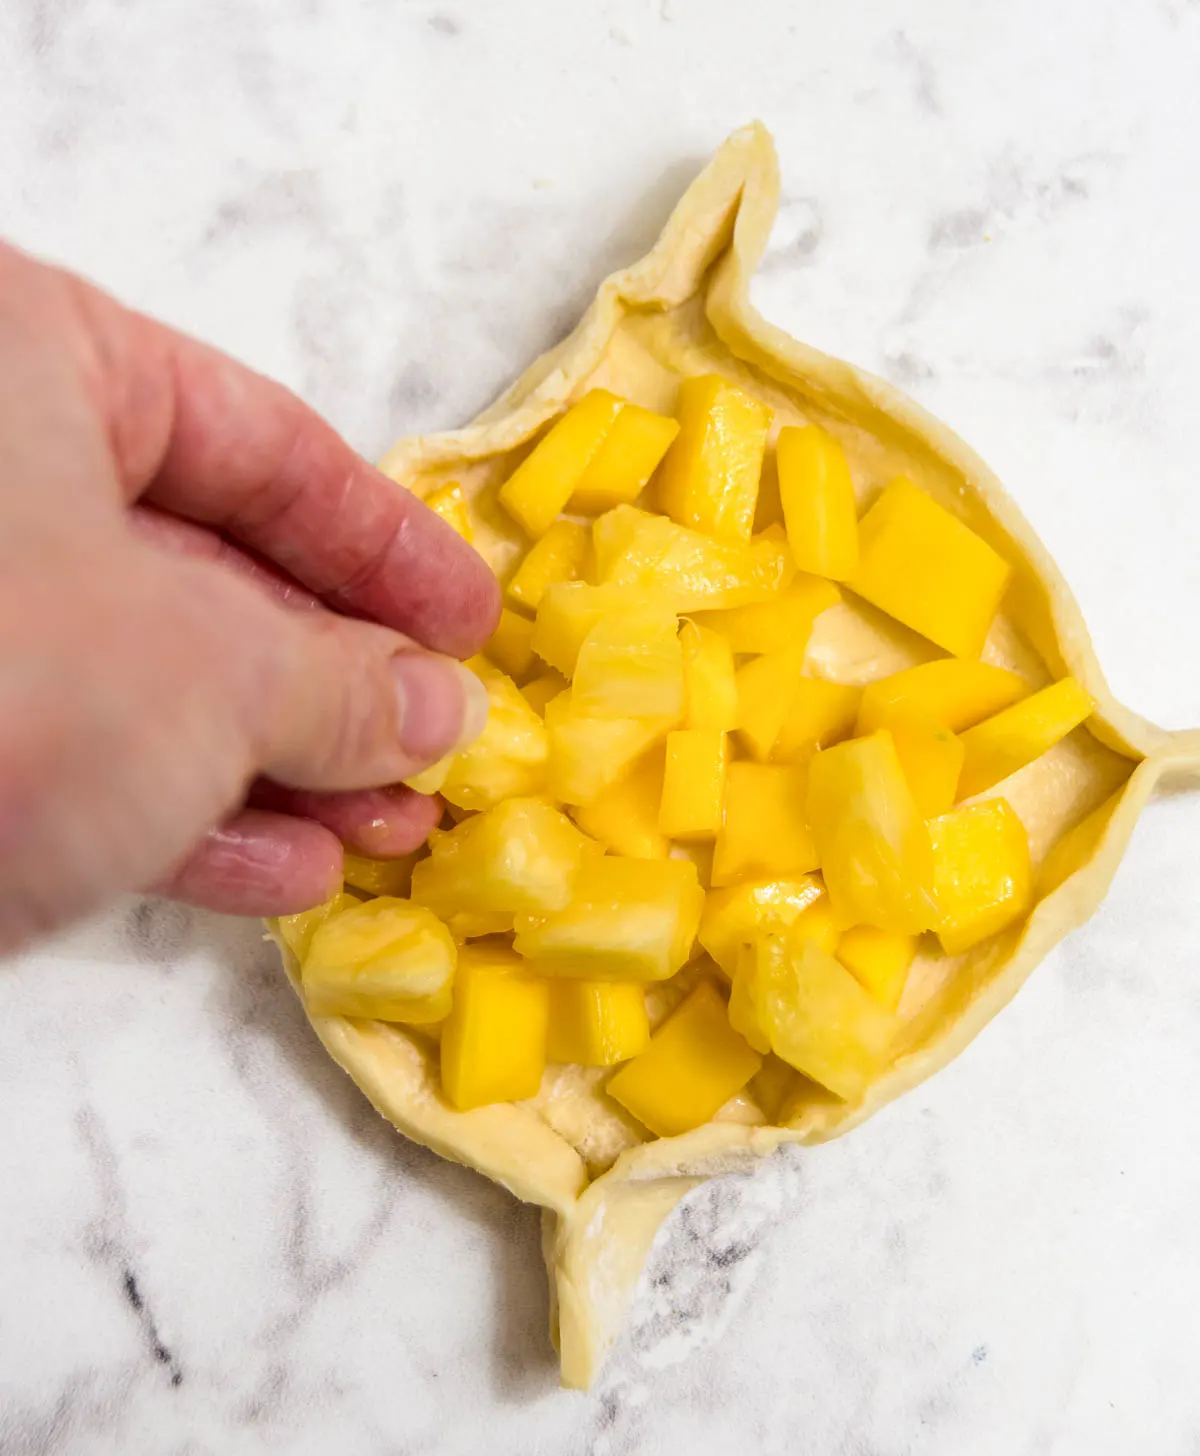 Adding pineapple pieces to puff pastry